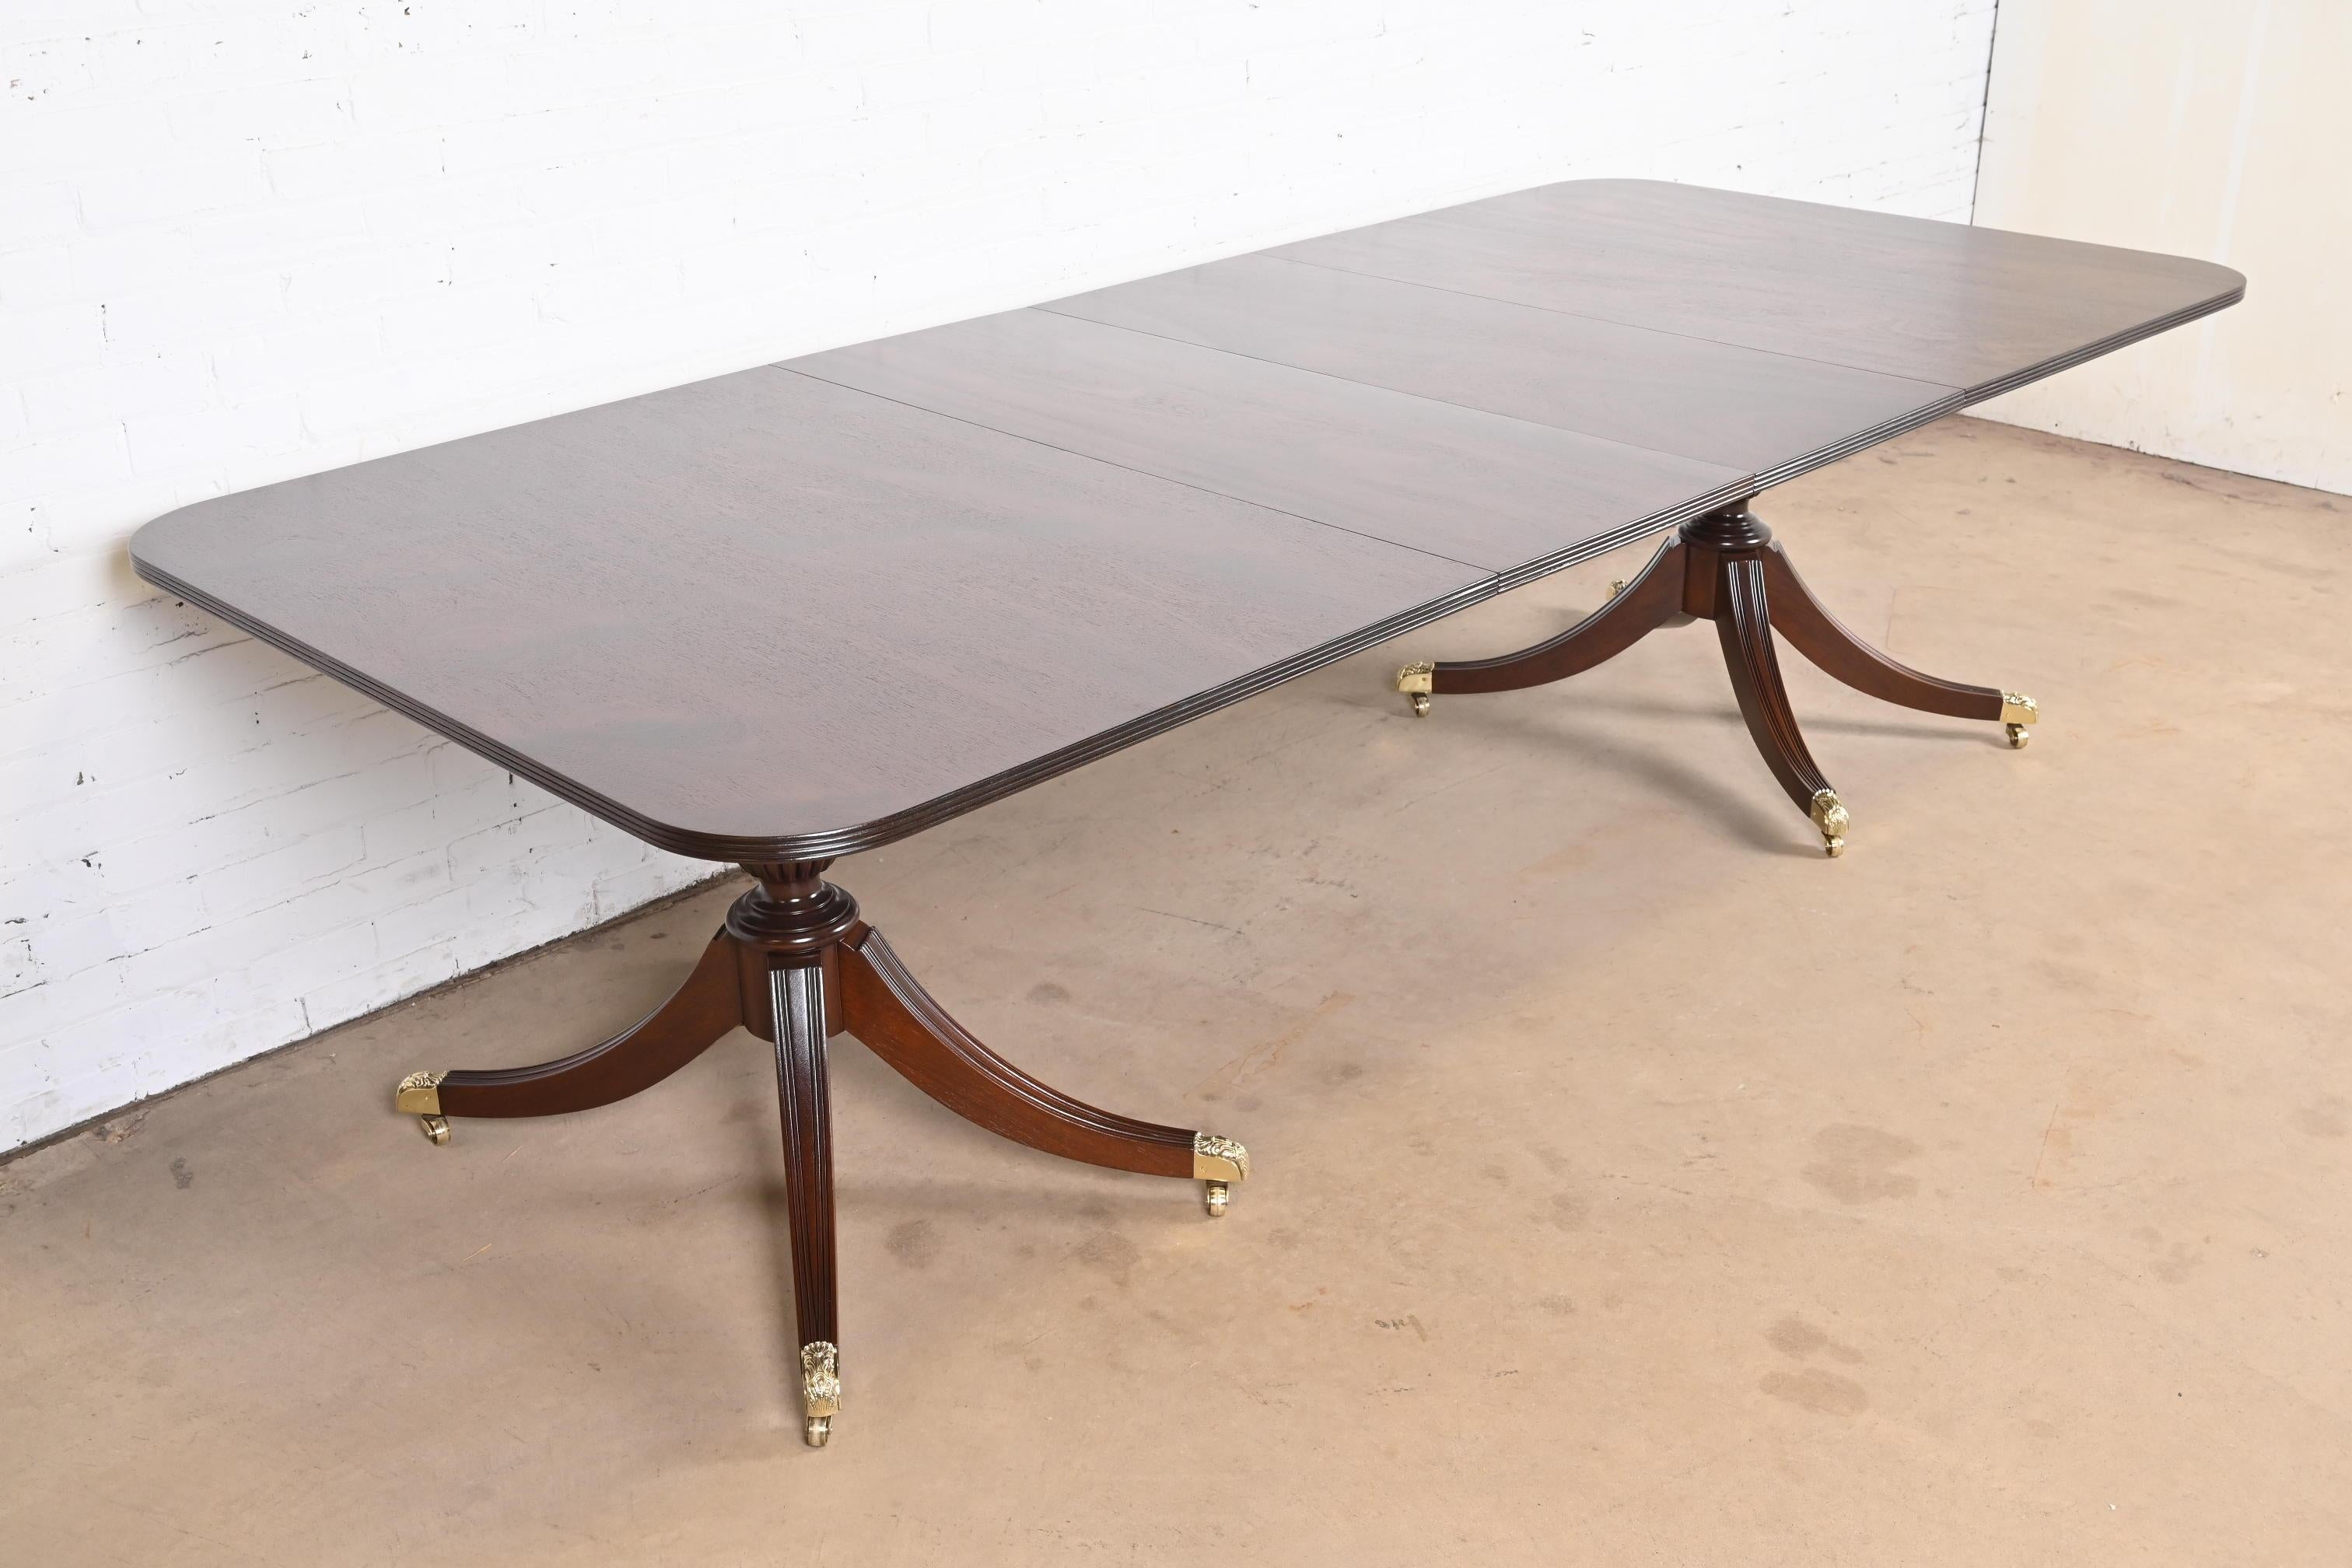 A gorgeous Georgian or Regency style double pedestal extension dining table

In the manner of Baker Furniture

USA, Circa 1980s

Beautiful mahogany, with carved solid mahogany pedestals, and brass-capped paw feet on brass casters.

Measures: 72